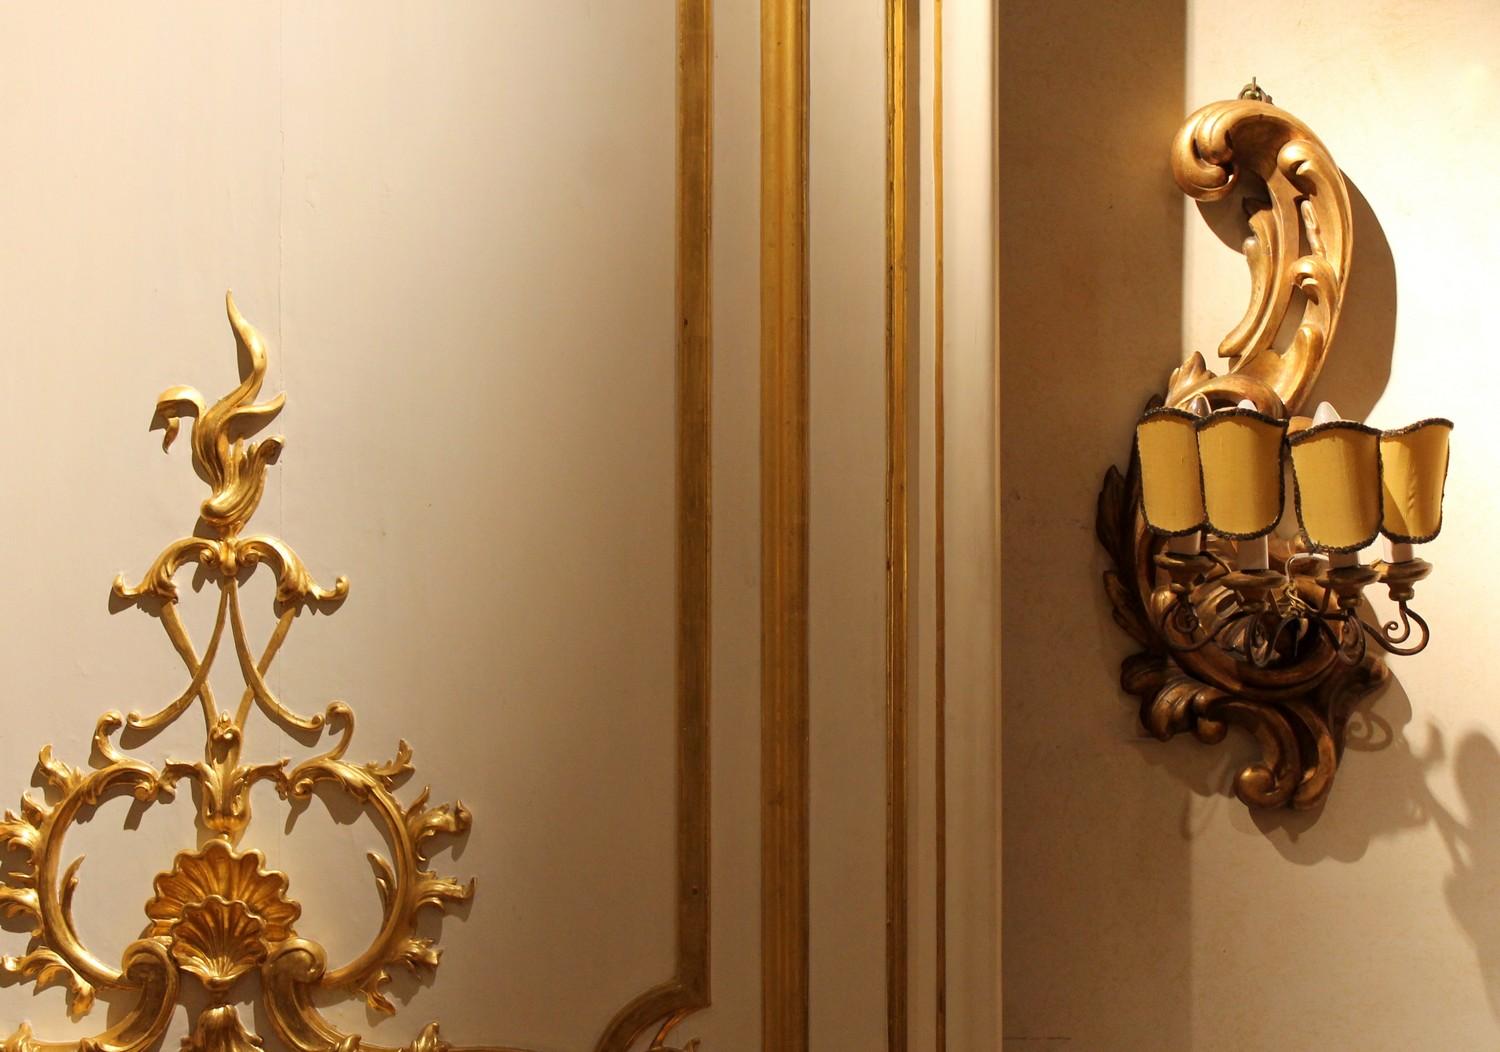 Intricately hand carved and pierced these antique Italian 19th century Rococo Revival Louis XVI style scrolled giltwood wall light sconces are a wonderful example of Tuscan craftsmanship in the art of wood carving and gilding and wrought